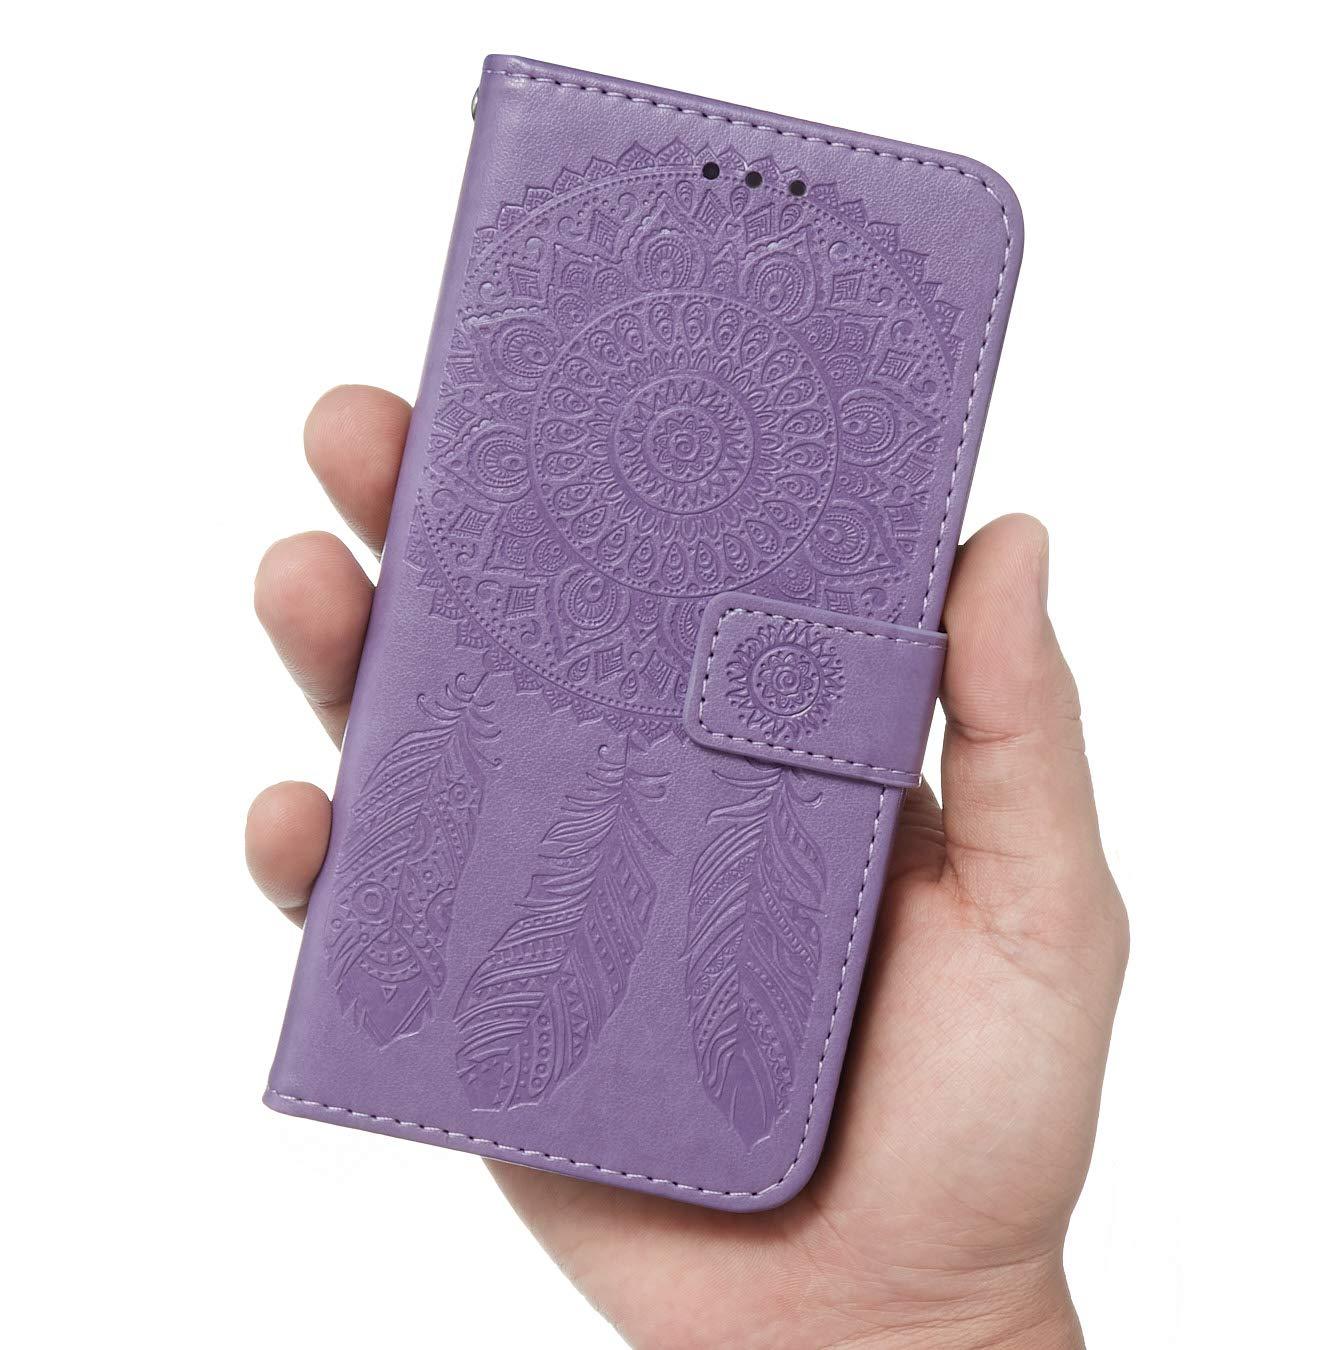 Caeouts Dream Catcher Printing Flip Leather Case For Galaxy